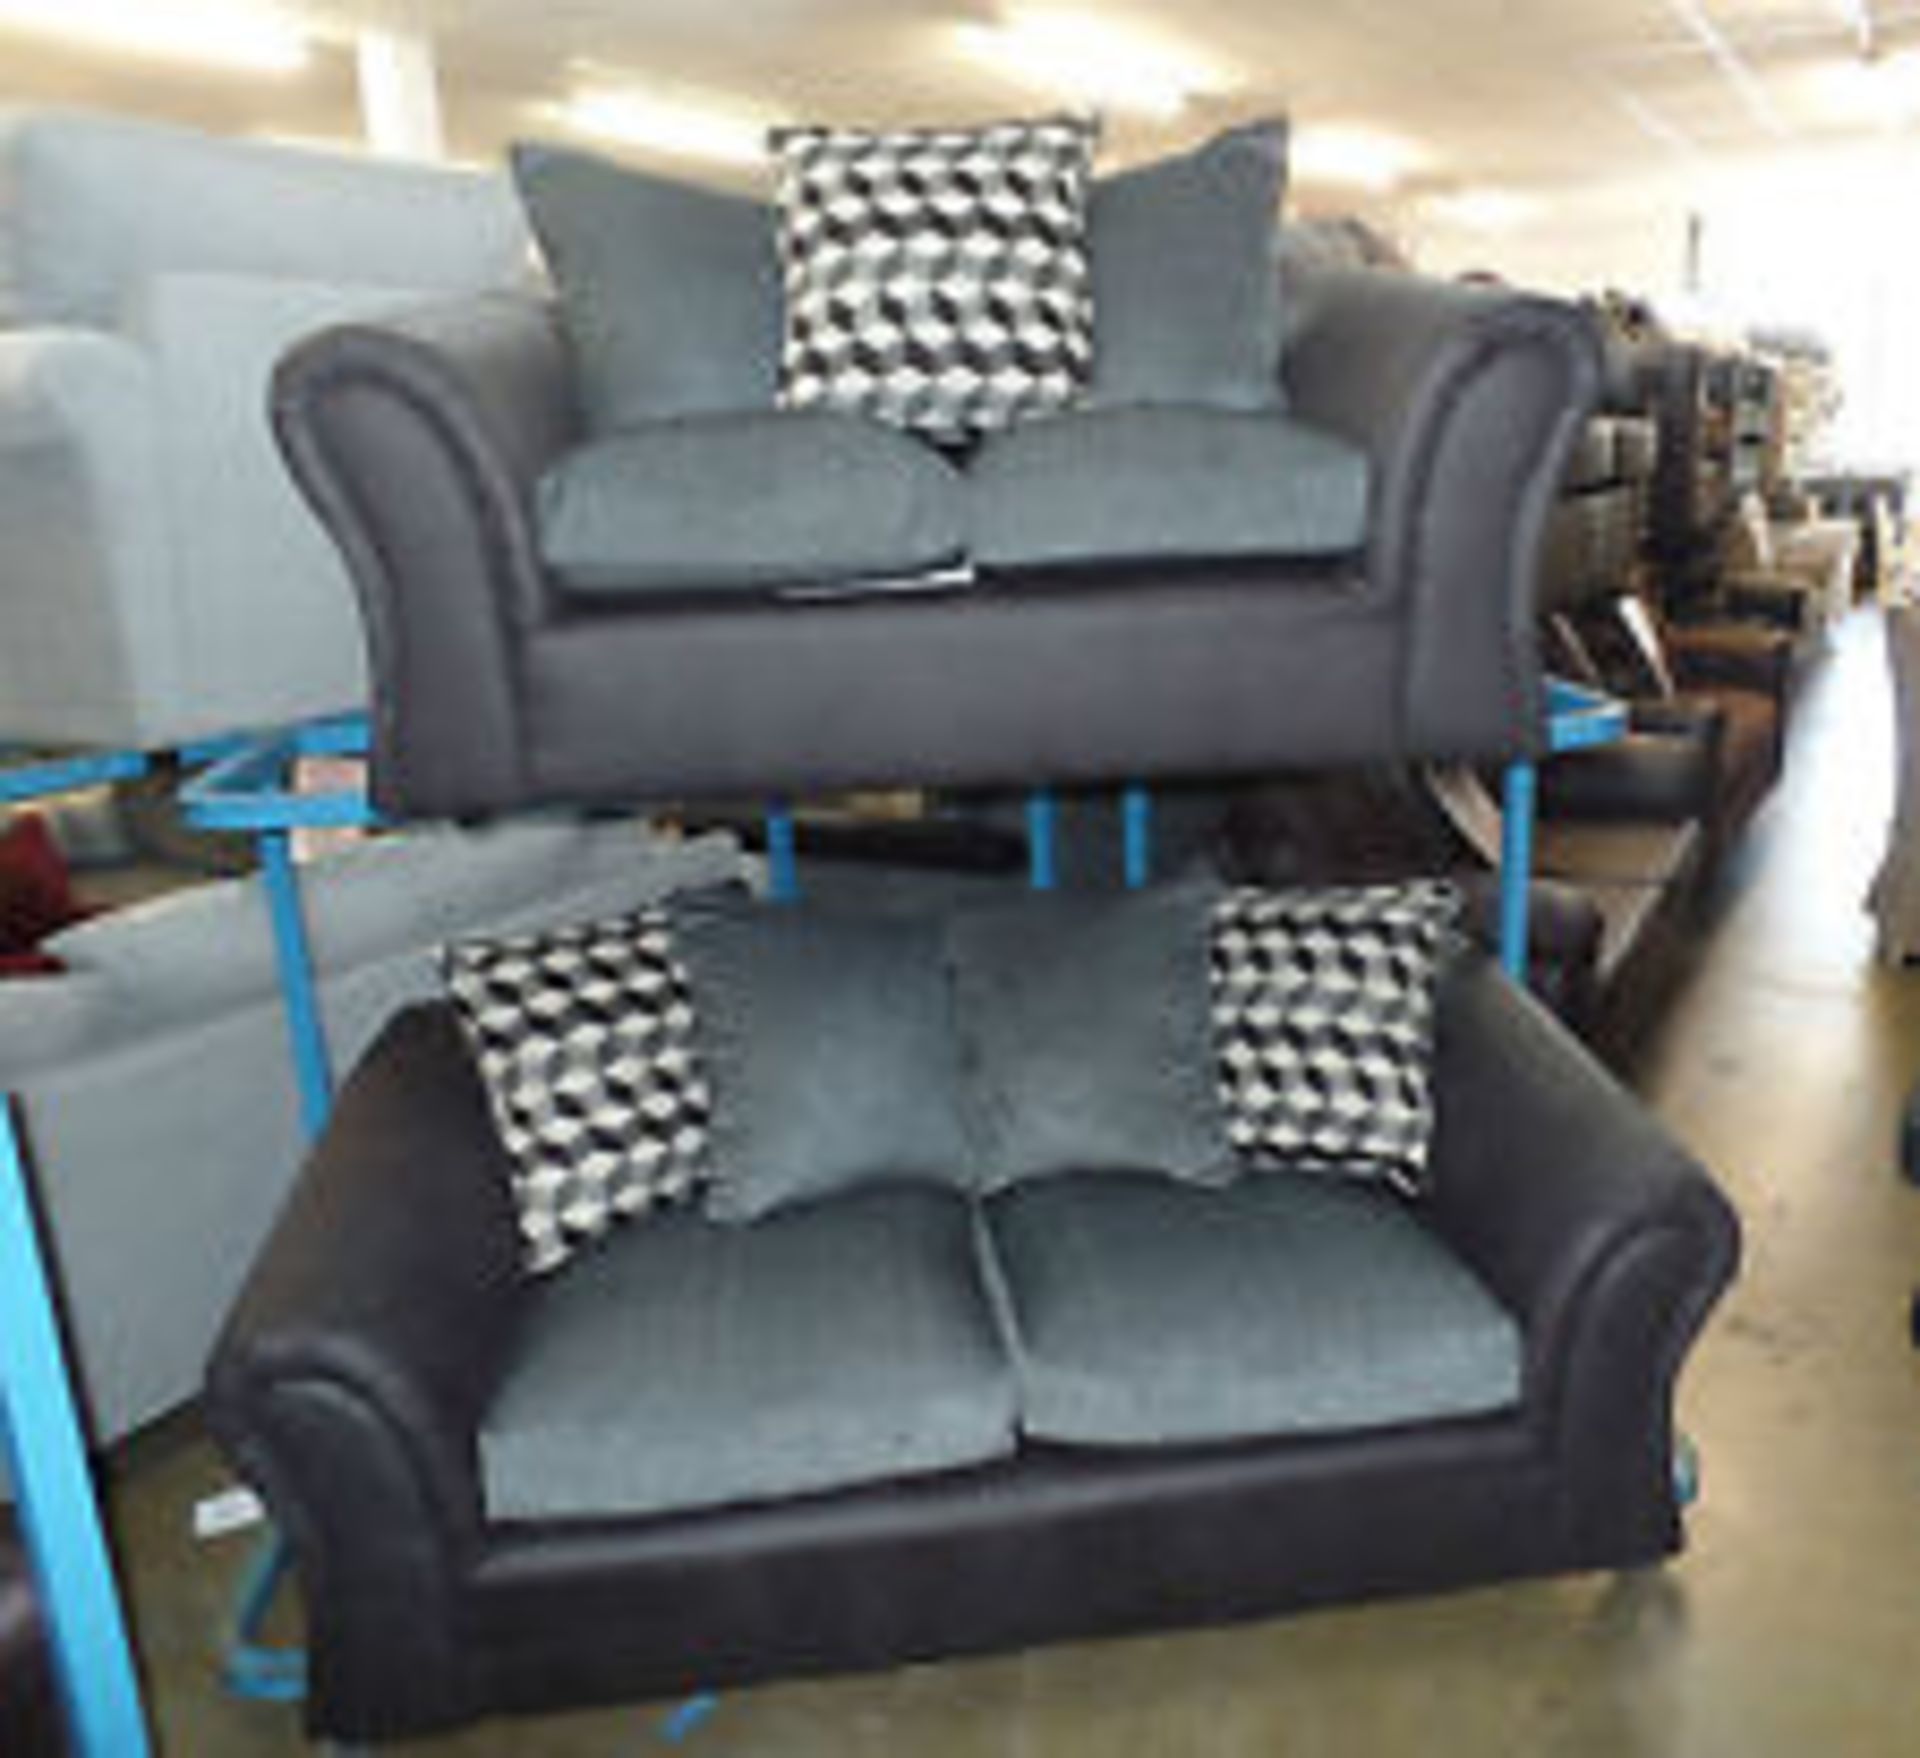 Brand new direct from the manufacturers 3 seater and 2 seater Zakira sofas designed with a black